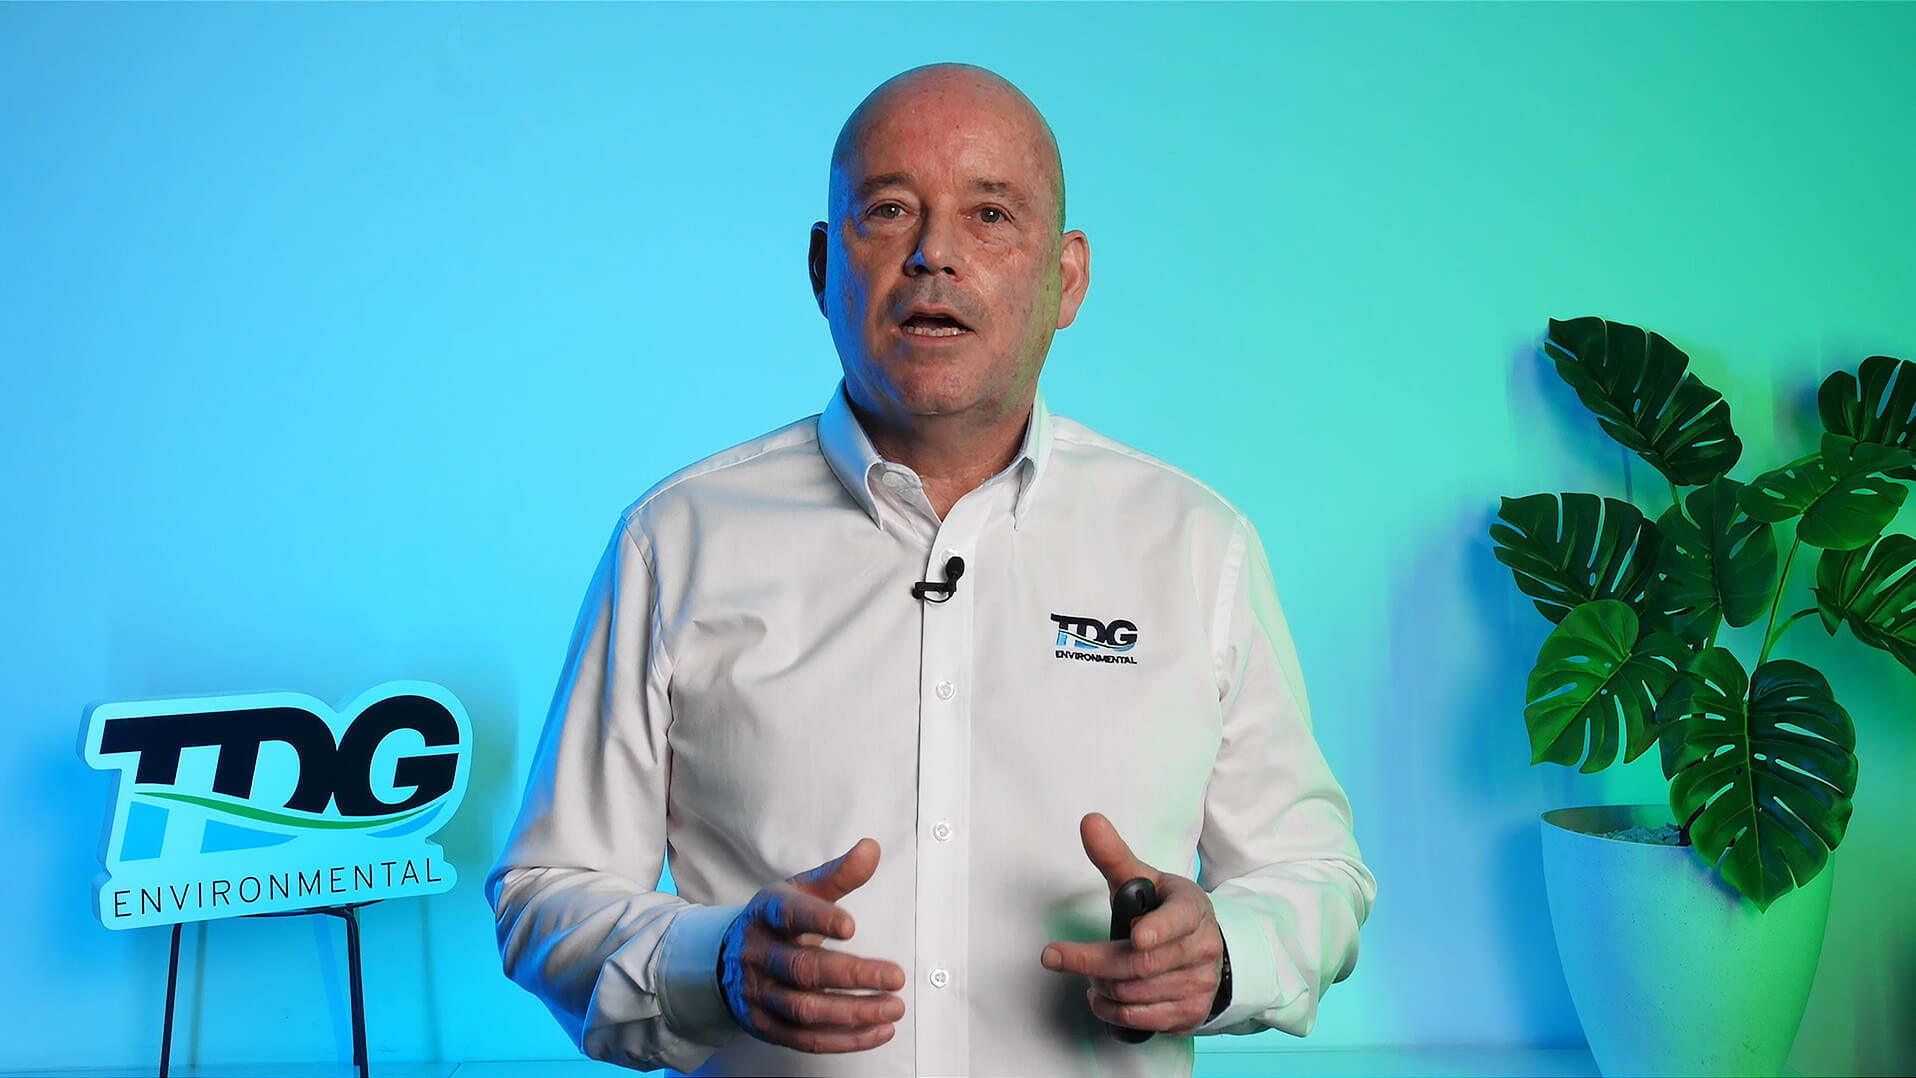 man in white business shirt talking and gesturing with his hands in front of background with a blue green gradient